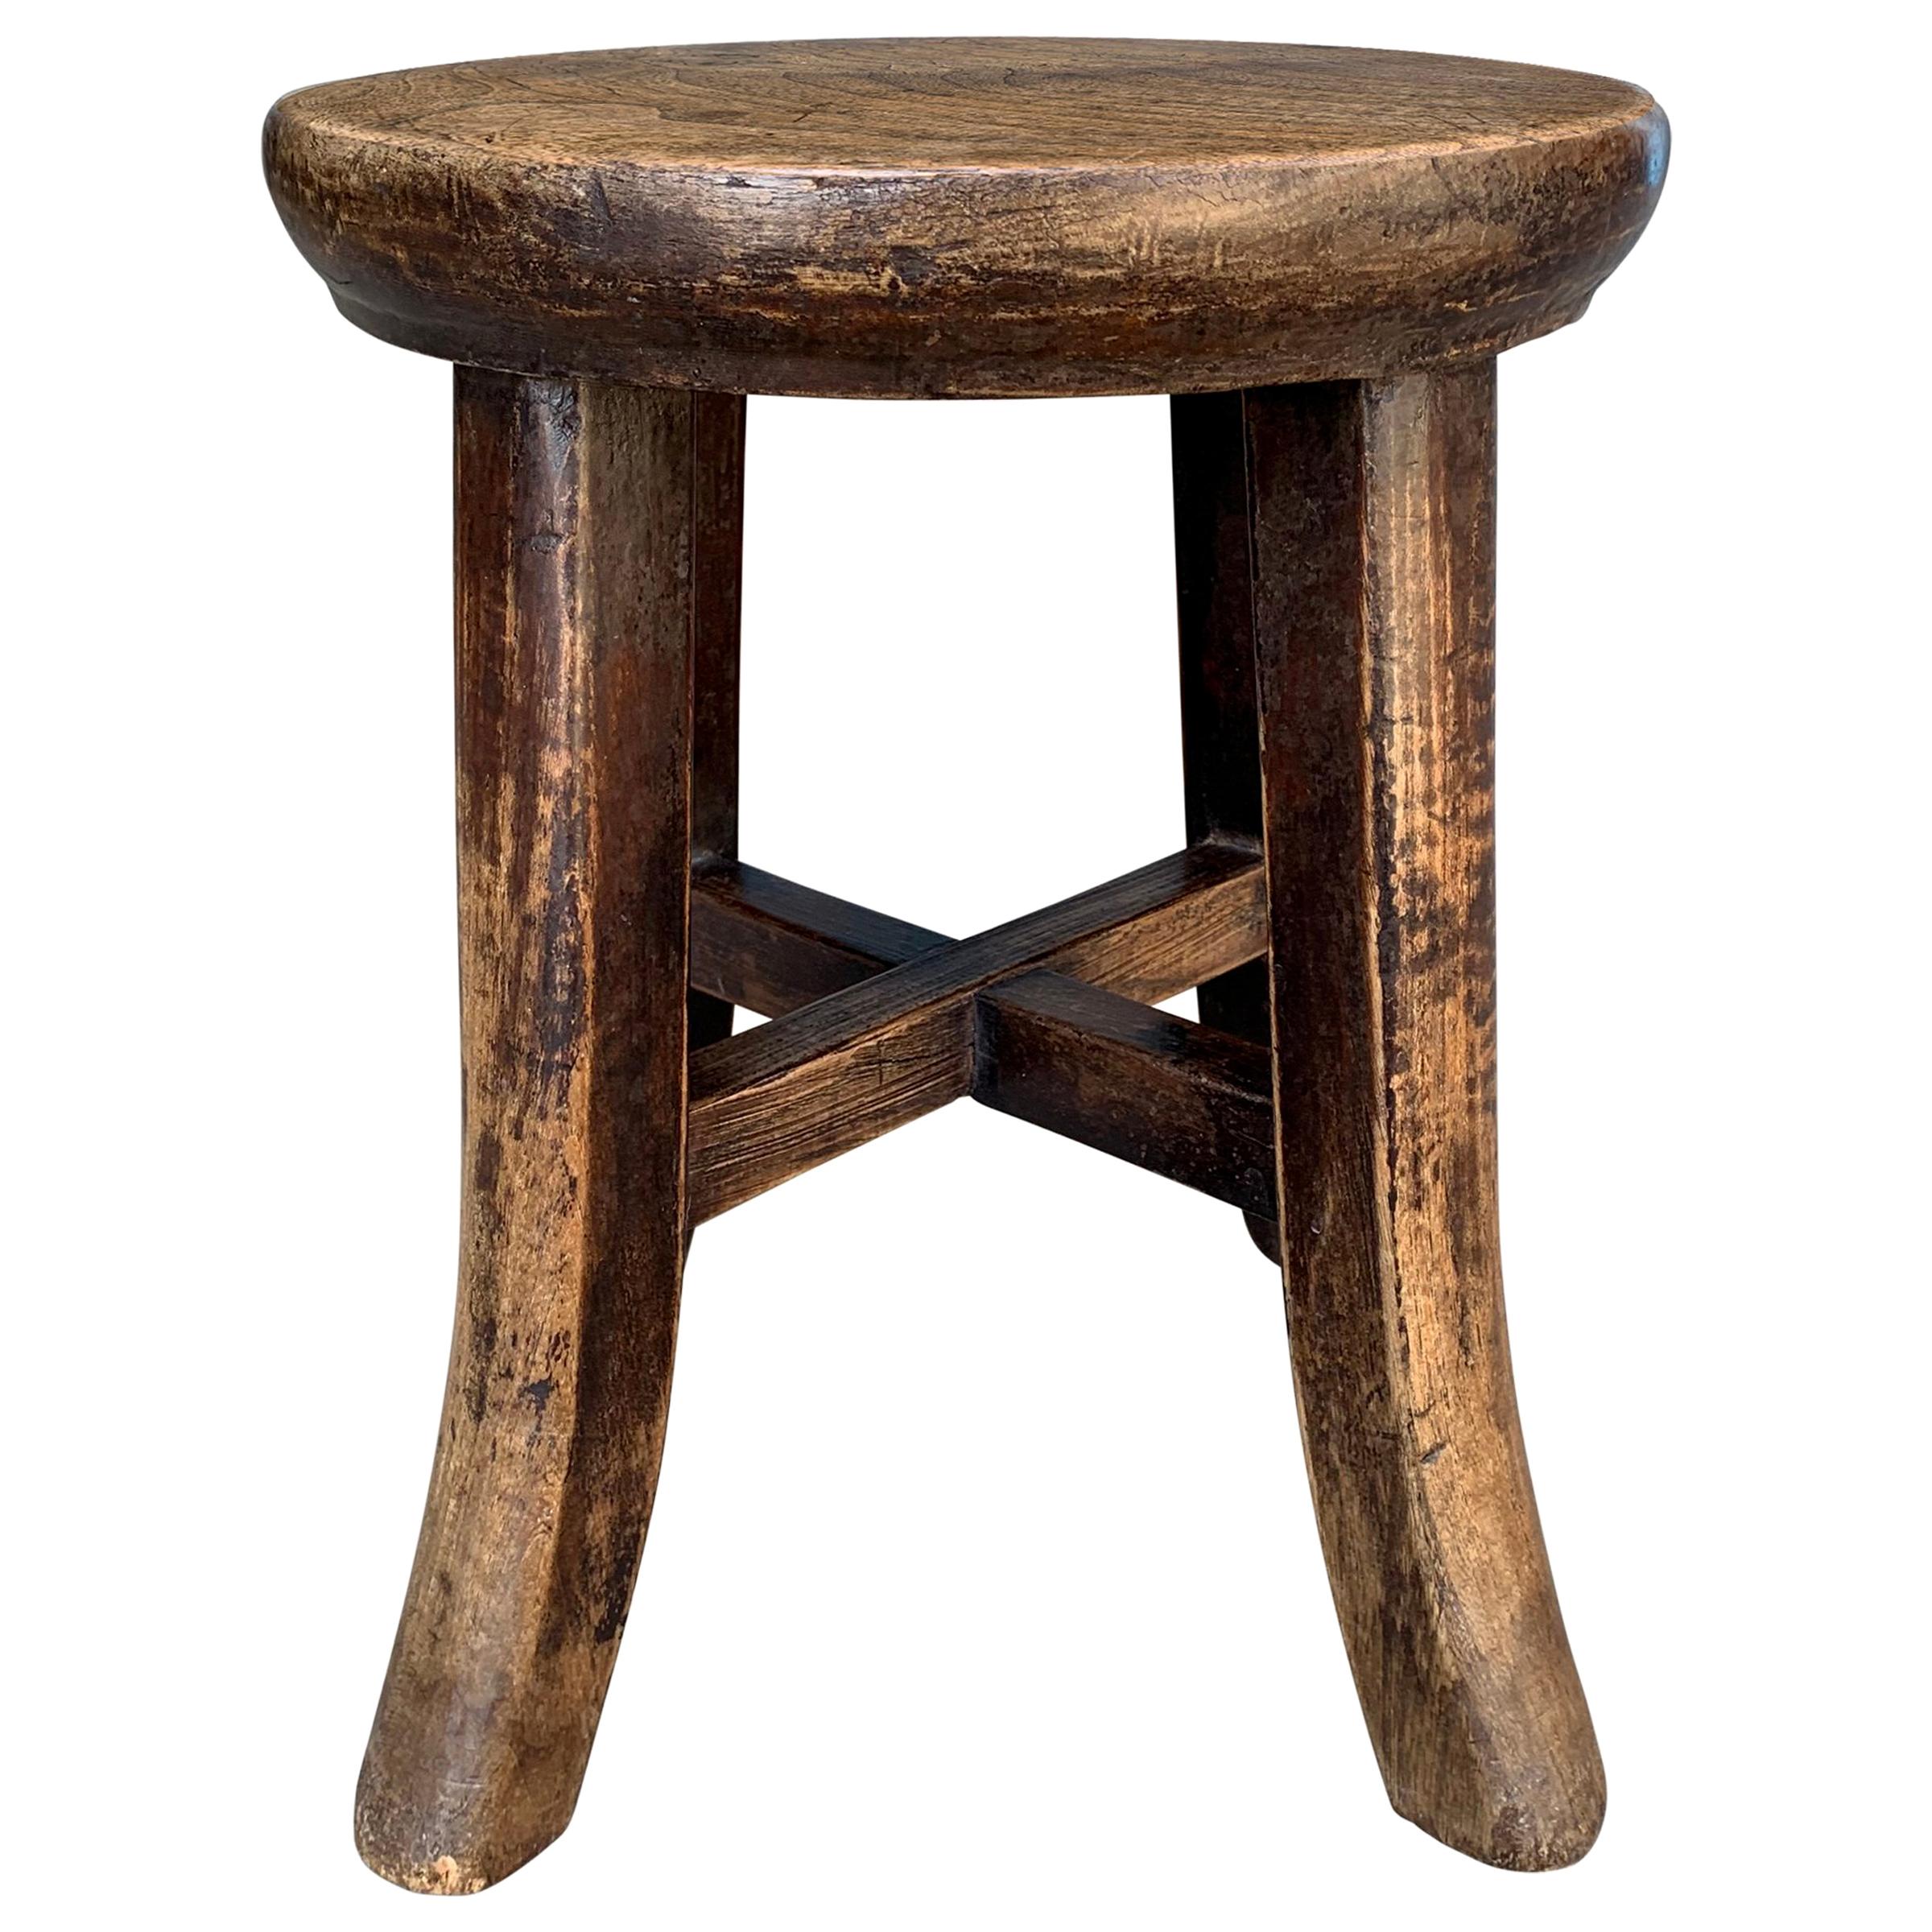 Early 20th Century Petite Chinese Stool